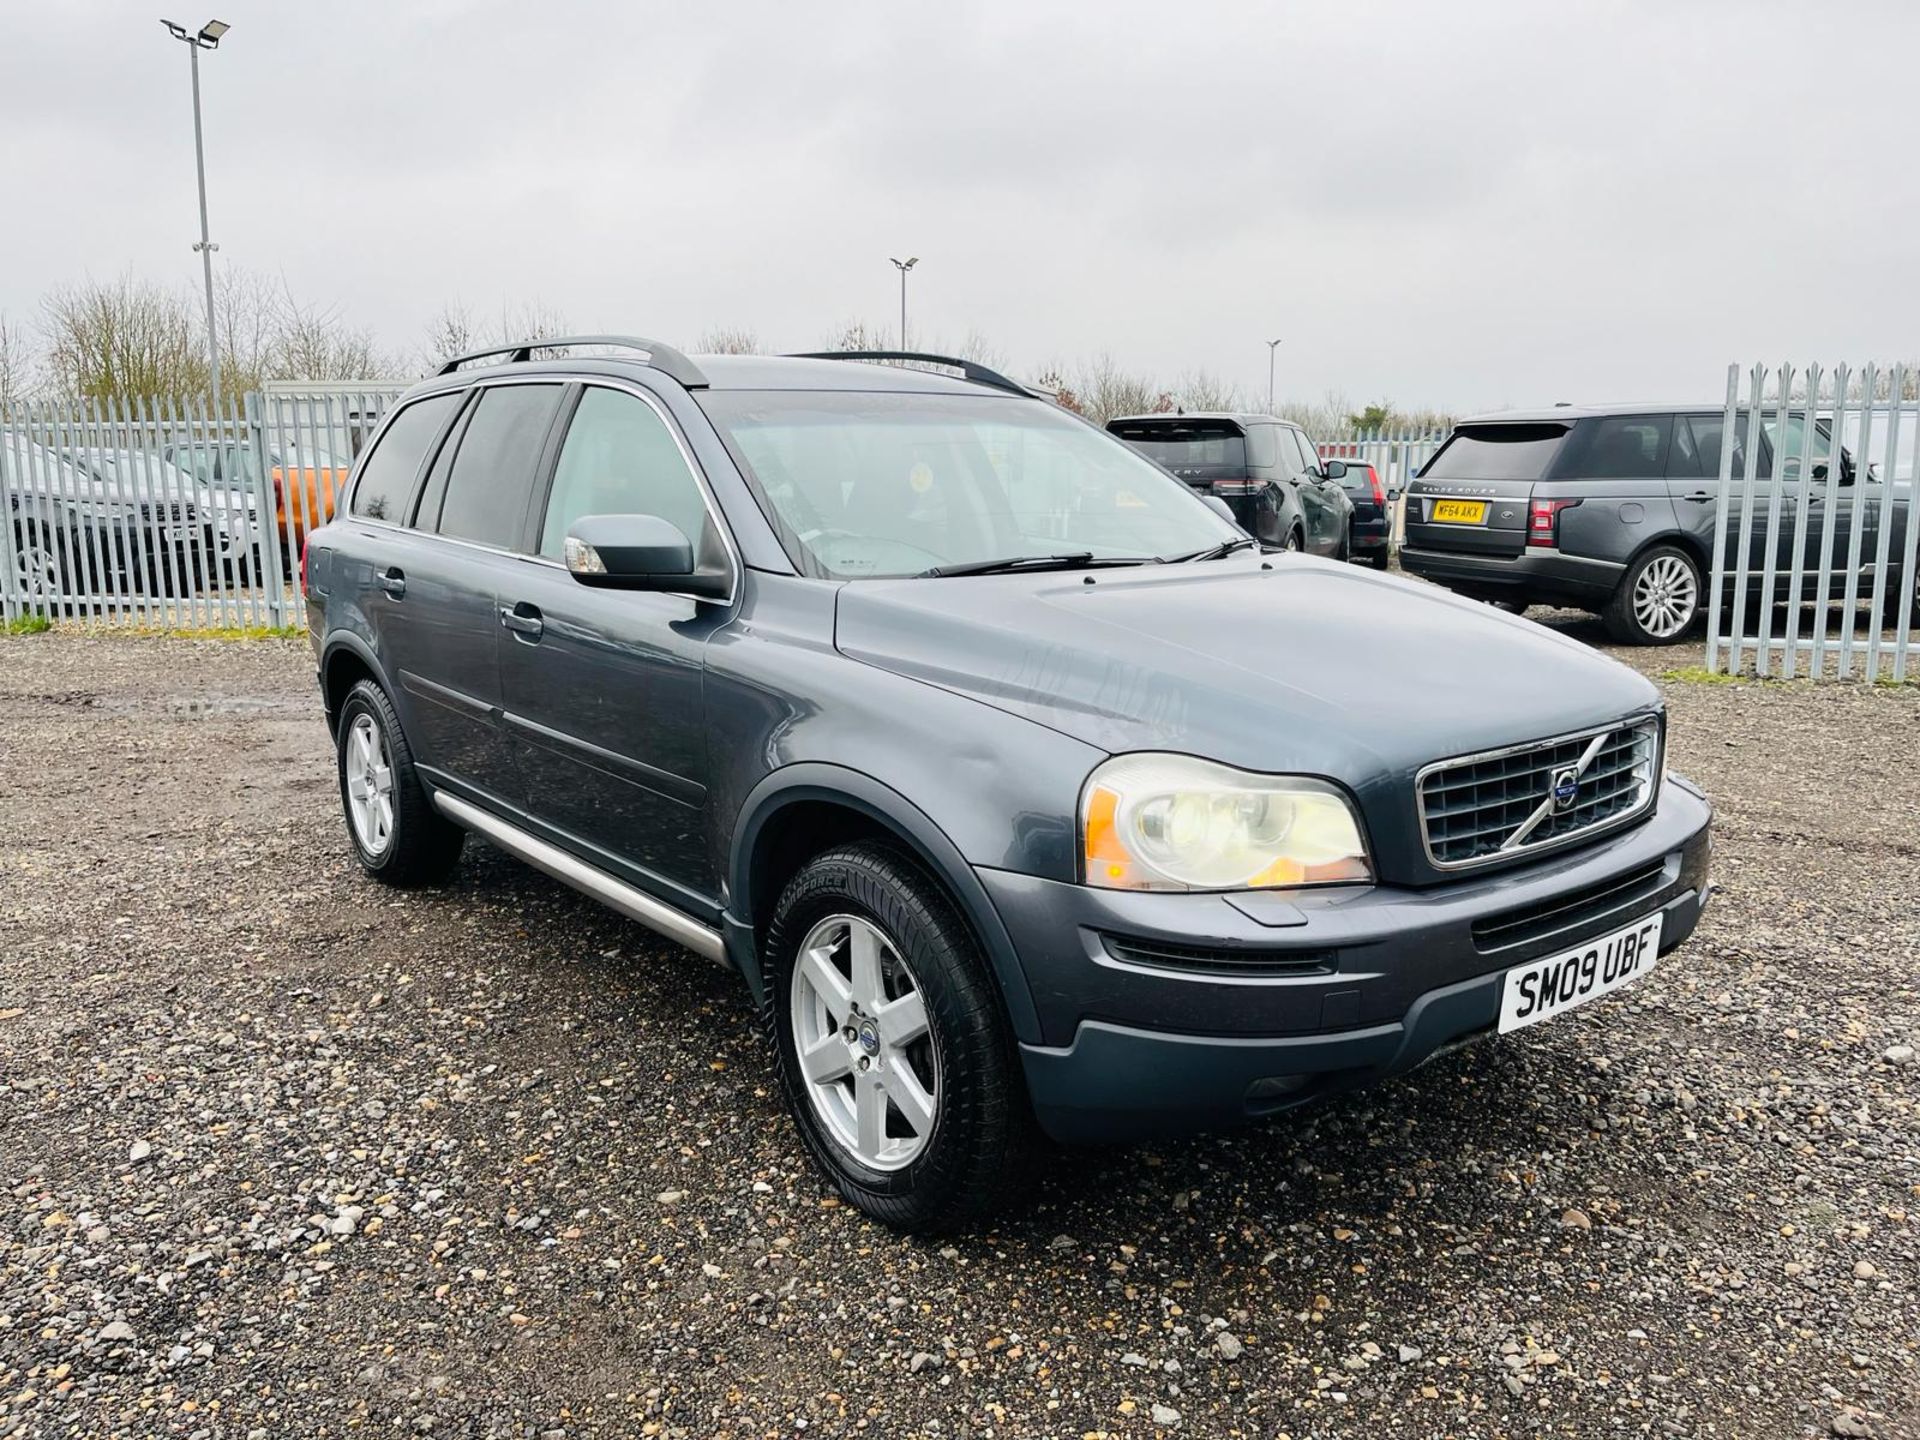 ** ON SALE ** Volvo Xc90 Active Automatic D5 185 Geartronic -Air Conditioning -Bluetooth Handsfree